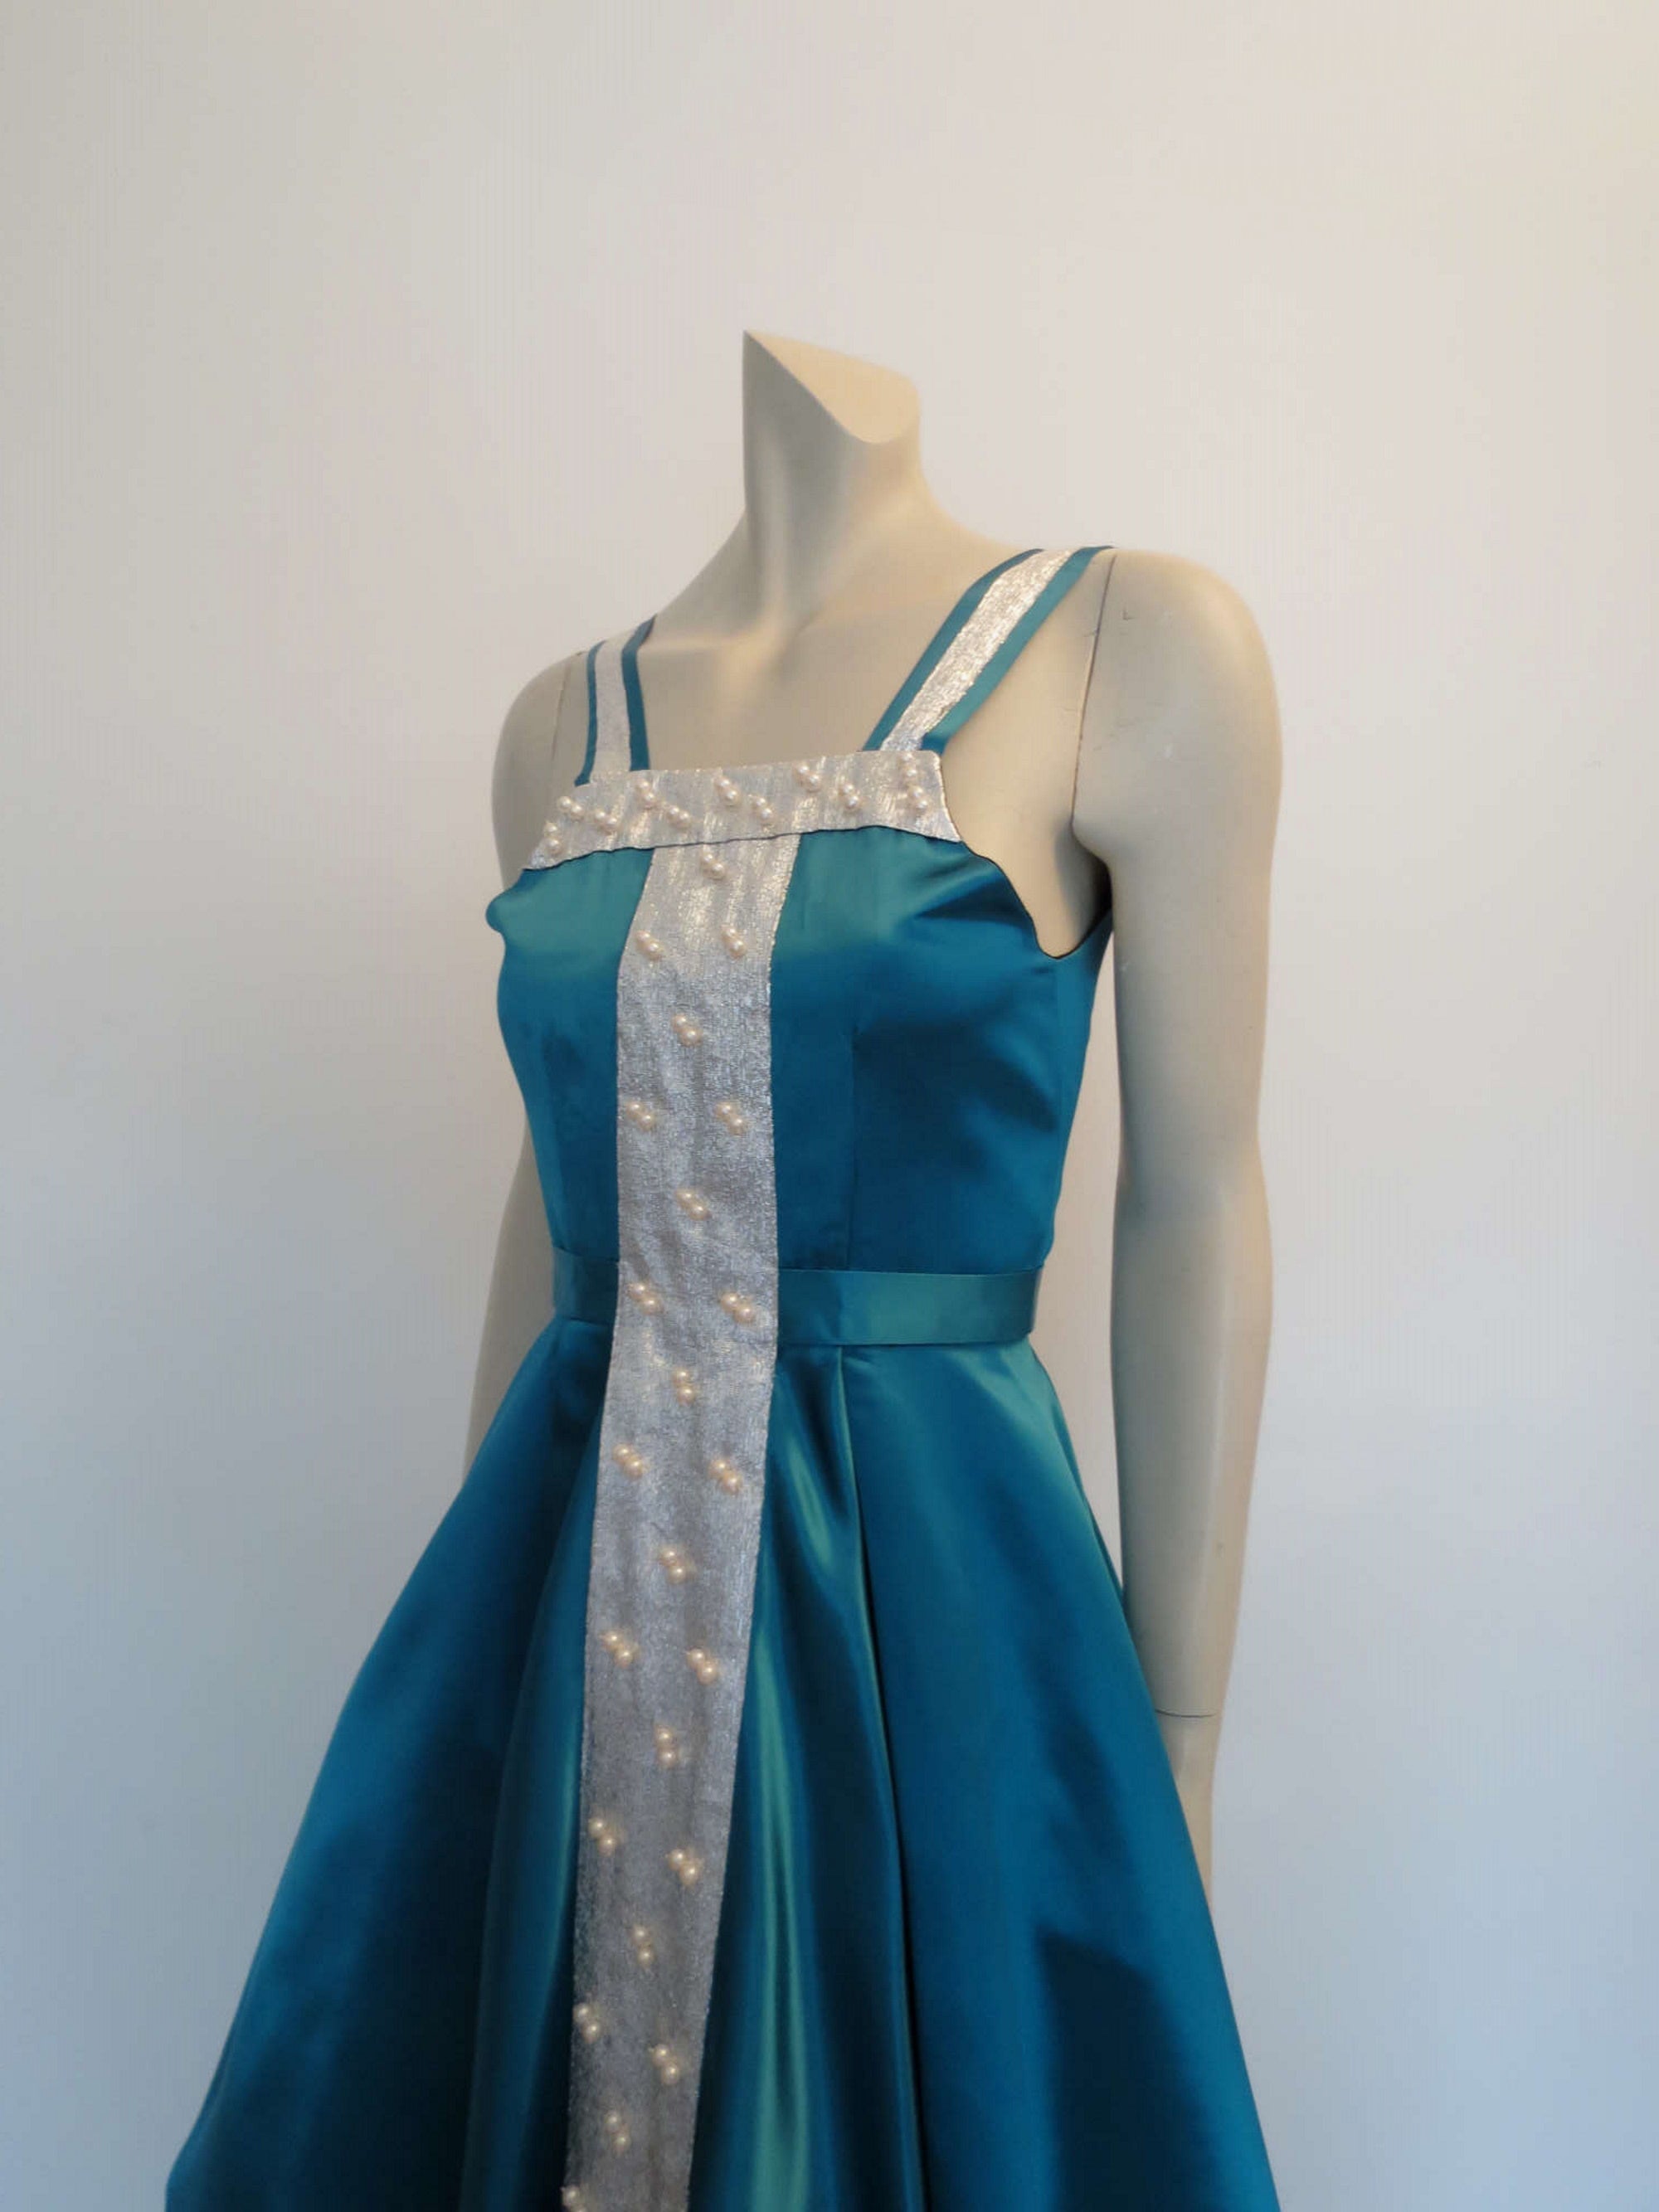 vintage teal green satin ballroom dancing dress with silver and pearl trim